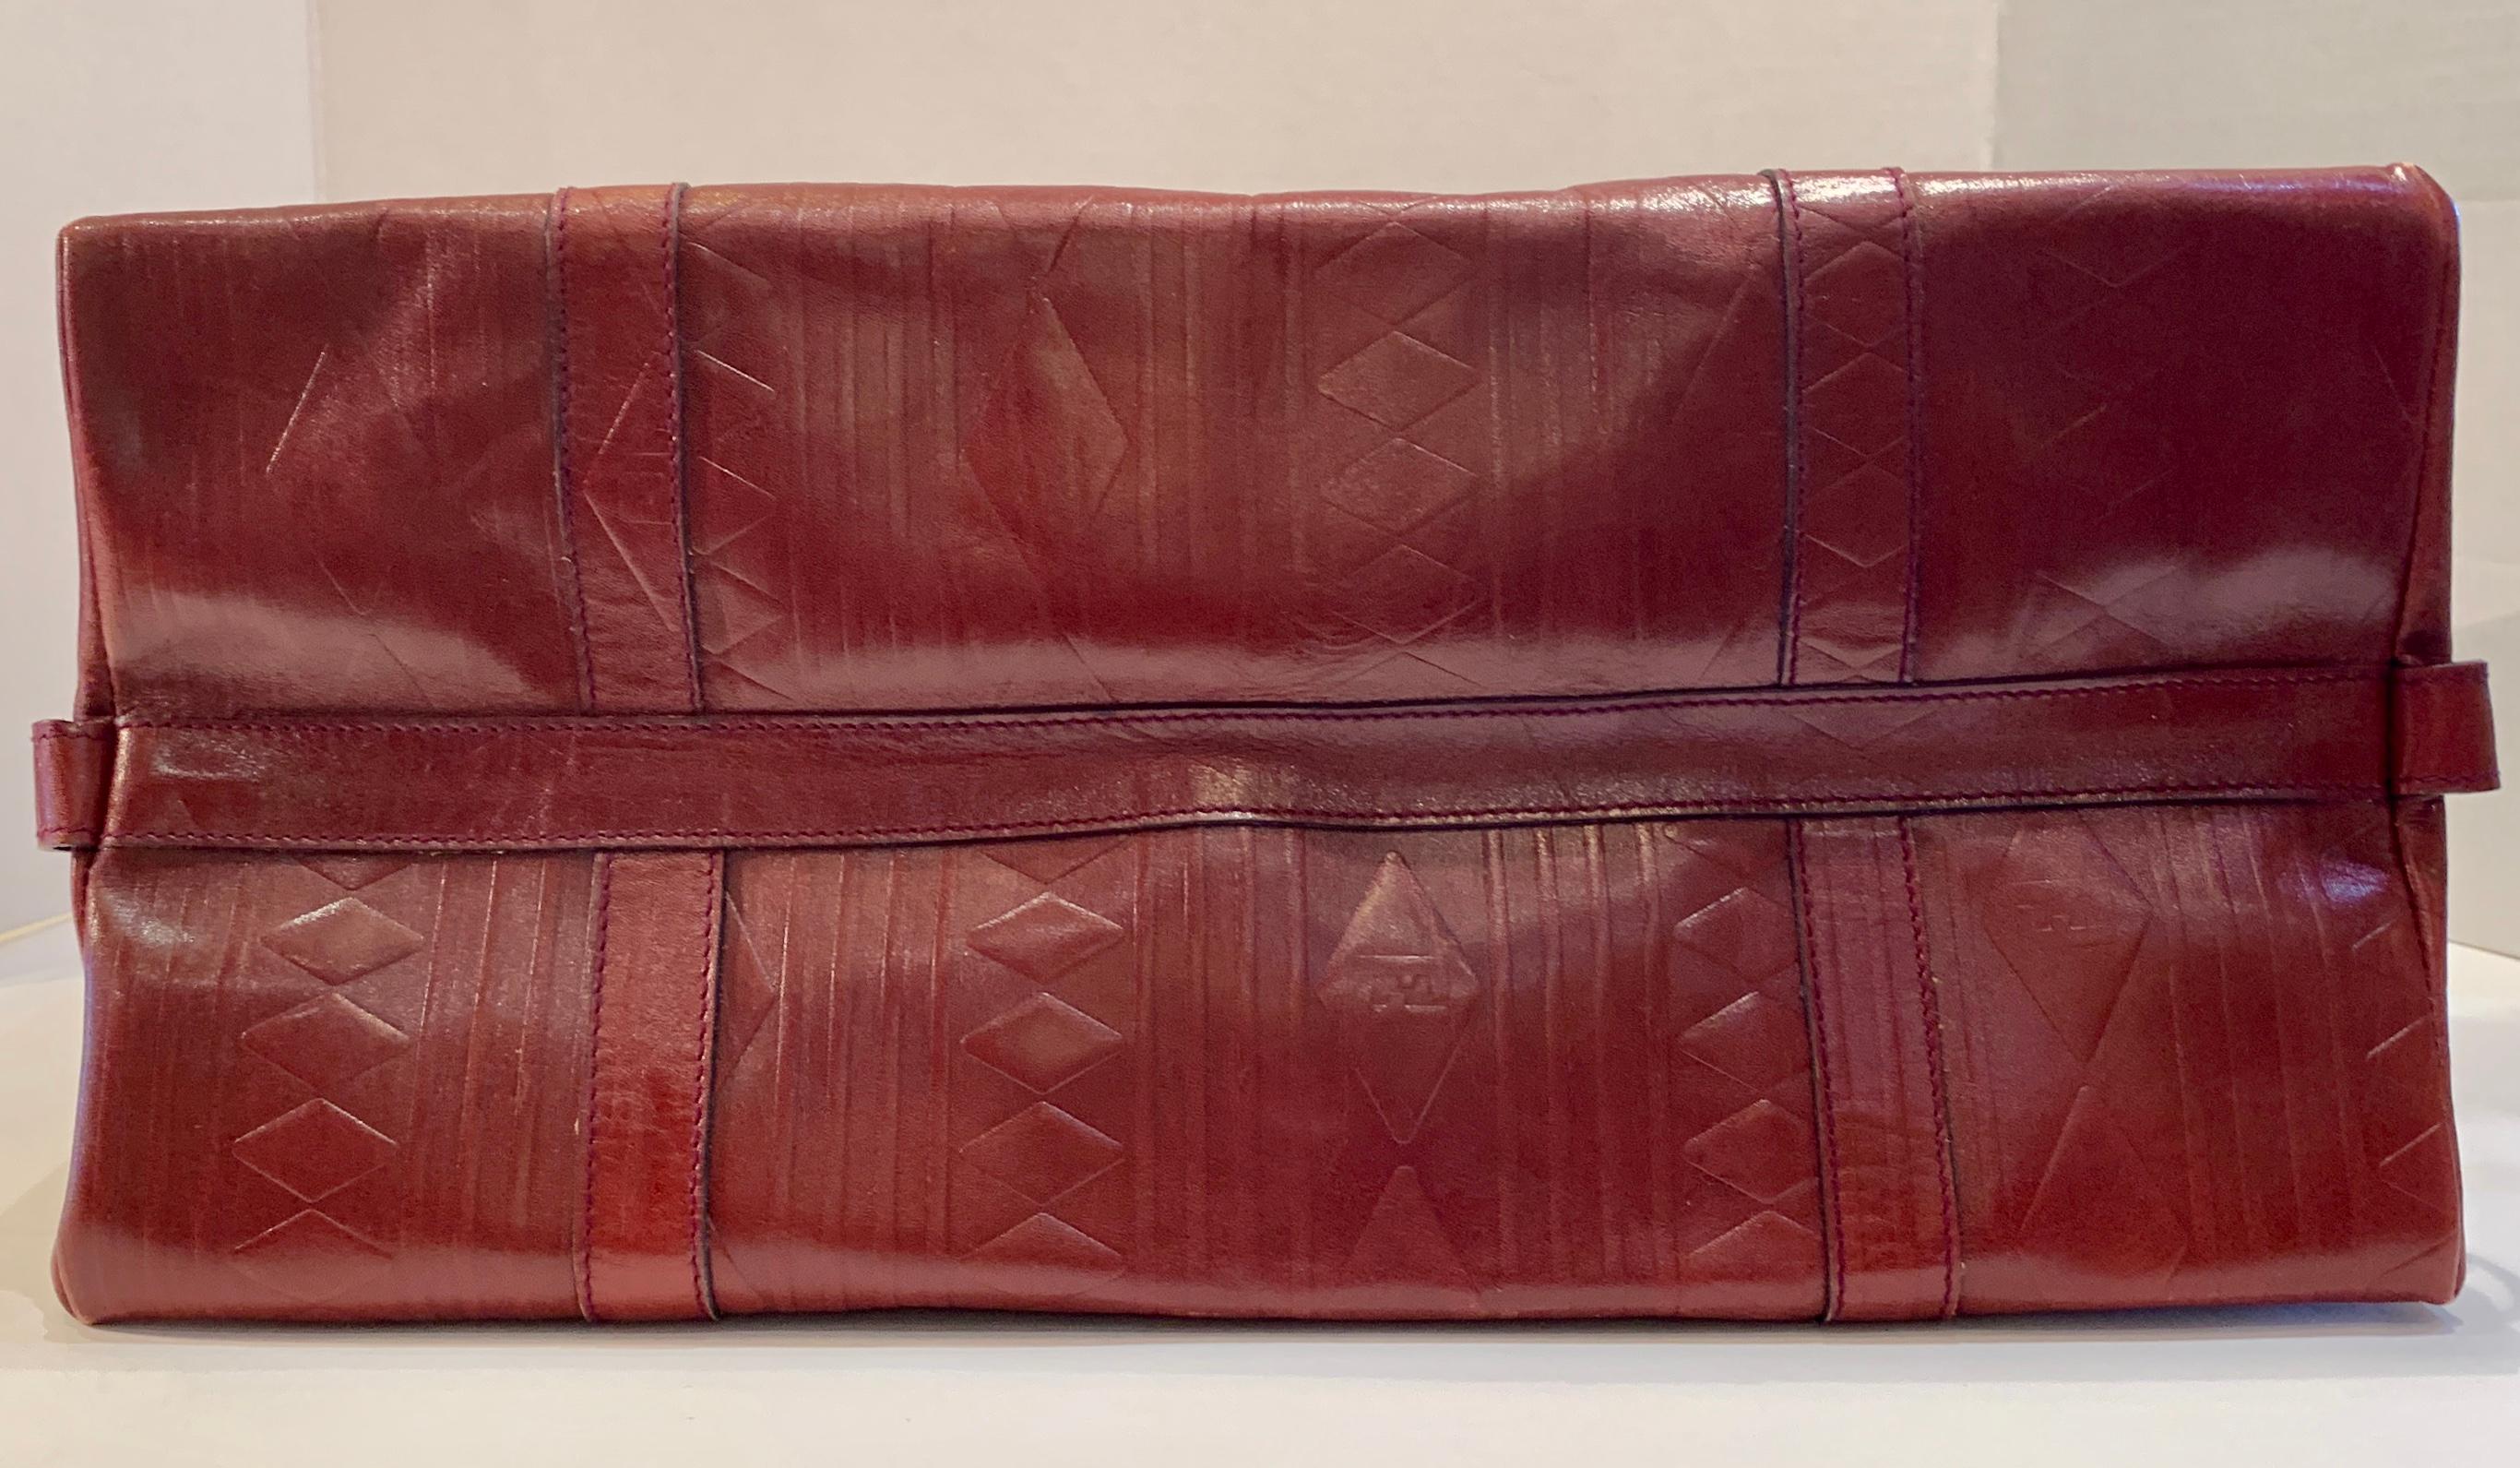 Women's or Men's Very Large 1980s FENDI S.A.S. Diamond Embossed Burgundy Leather Purse For Sale